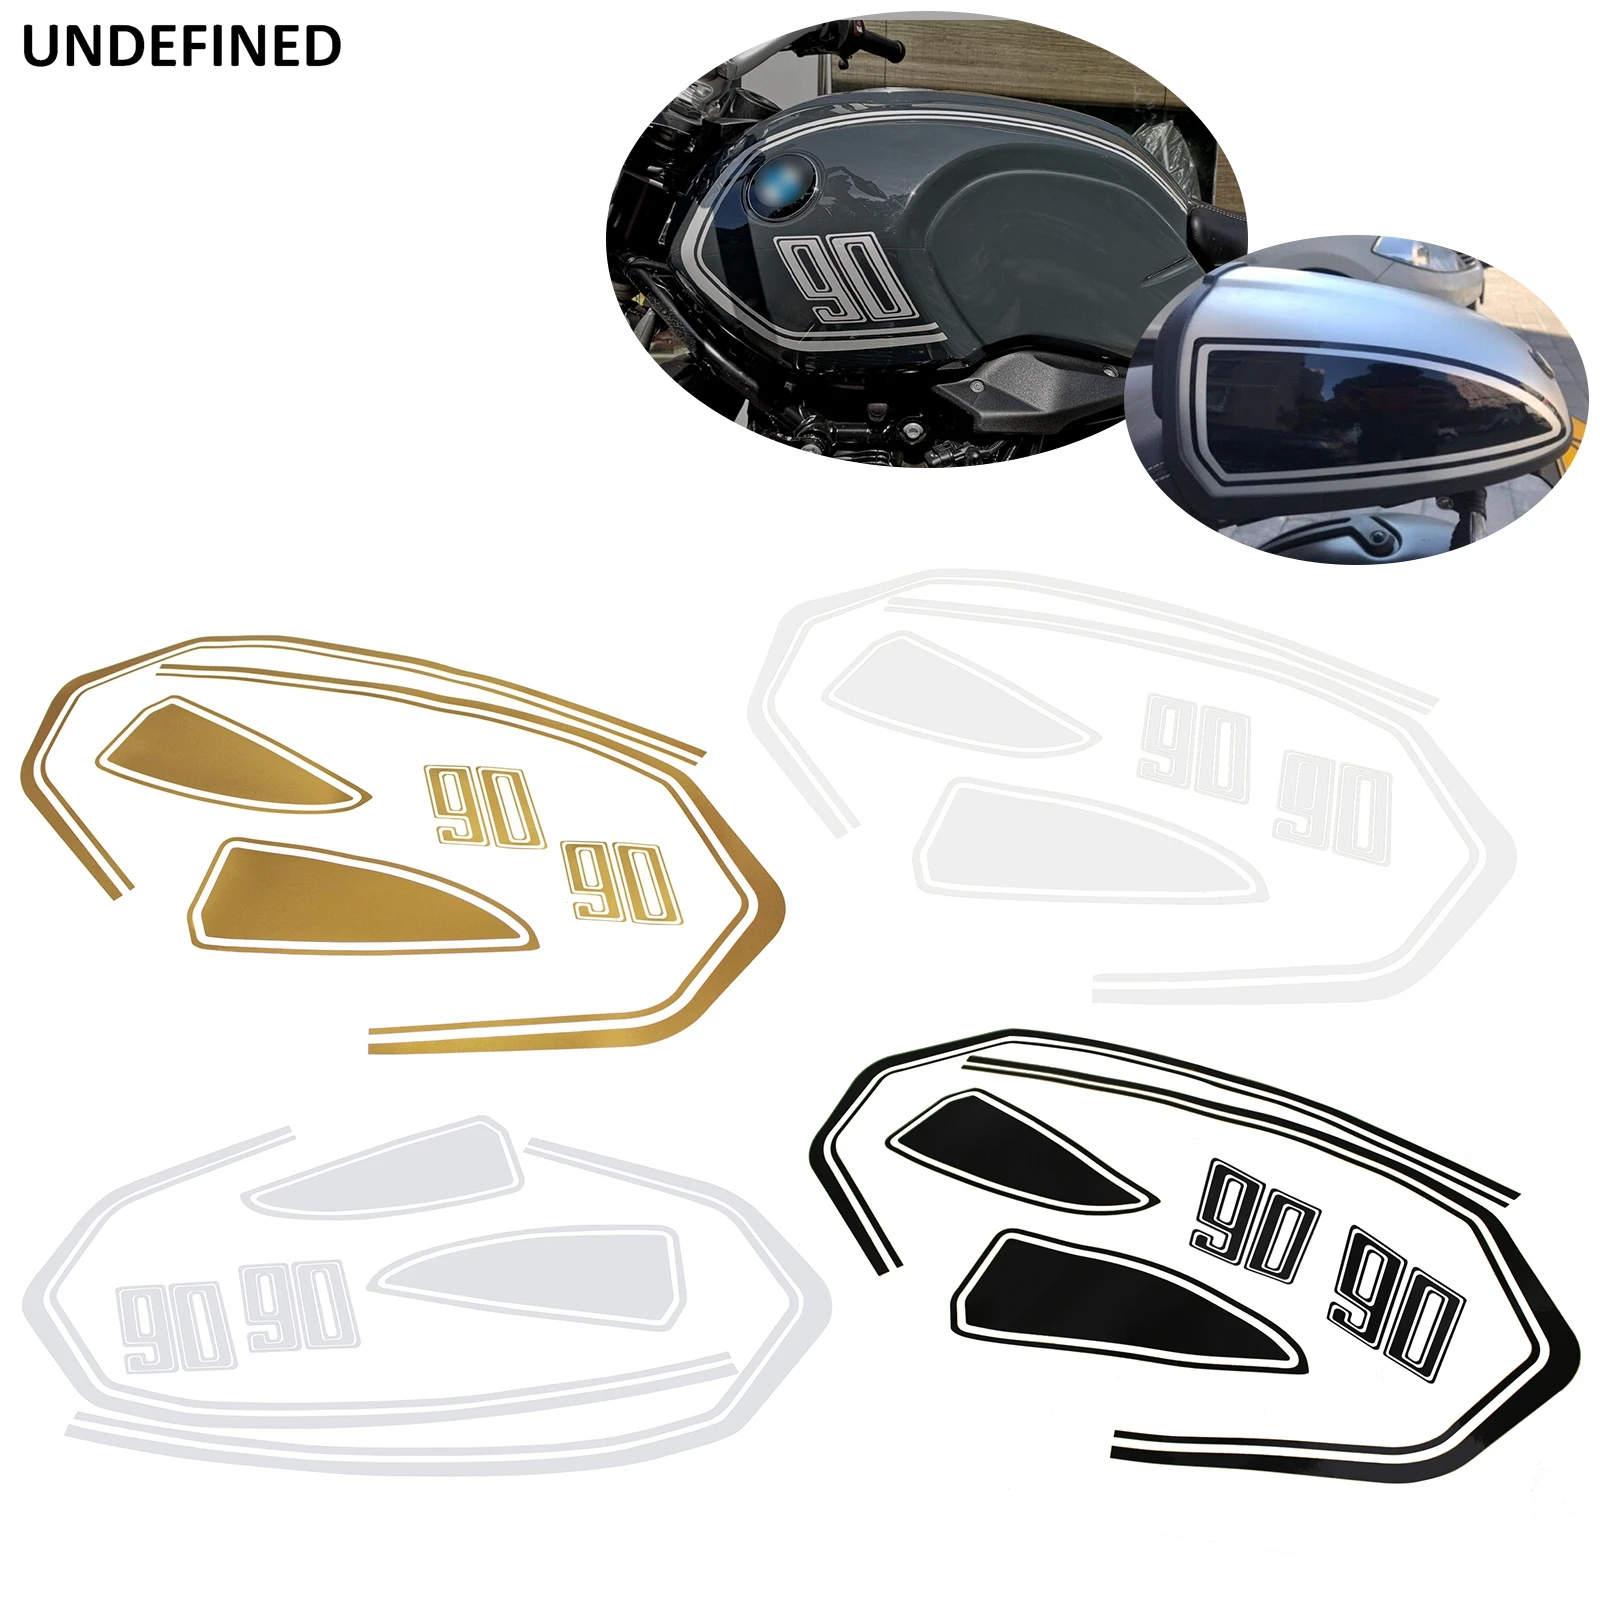 Motorcycle Fuel Tank Sticker Rear Pillion Seat Cowl Hump Box Decorative Decals for BMW R Nine T Scrambler Pure Racer 2014-2021